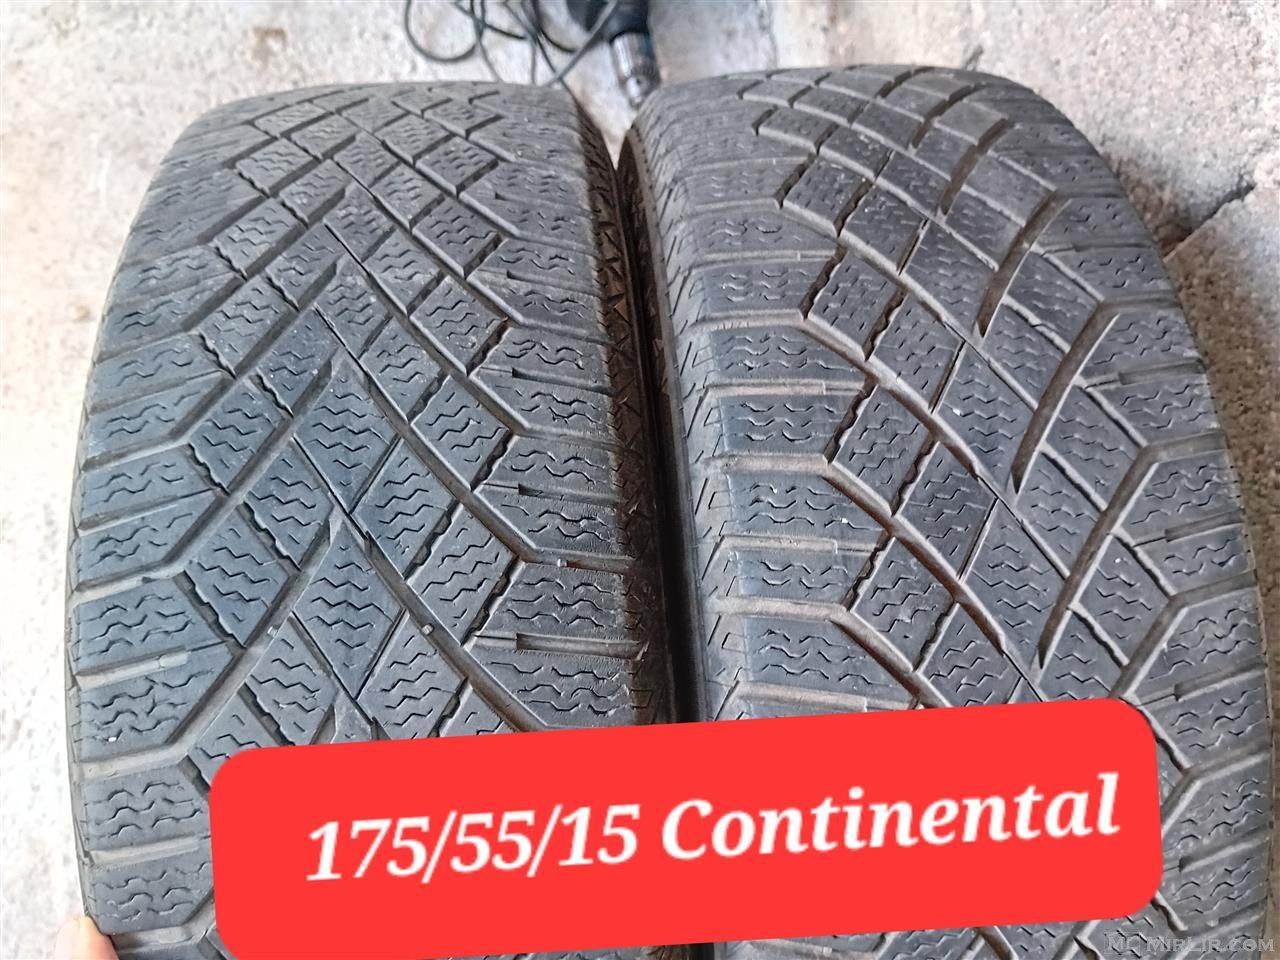 175/55/15 Dy cope Continental.